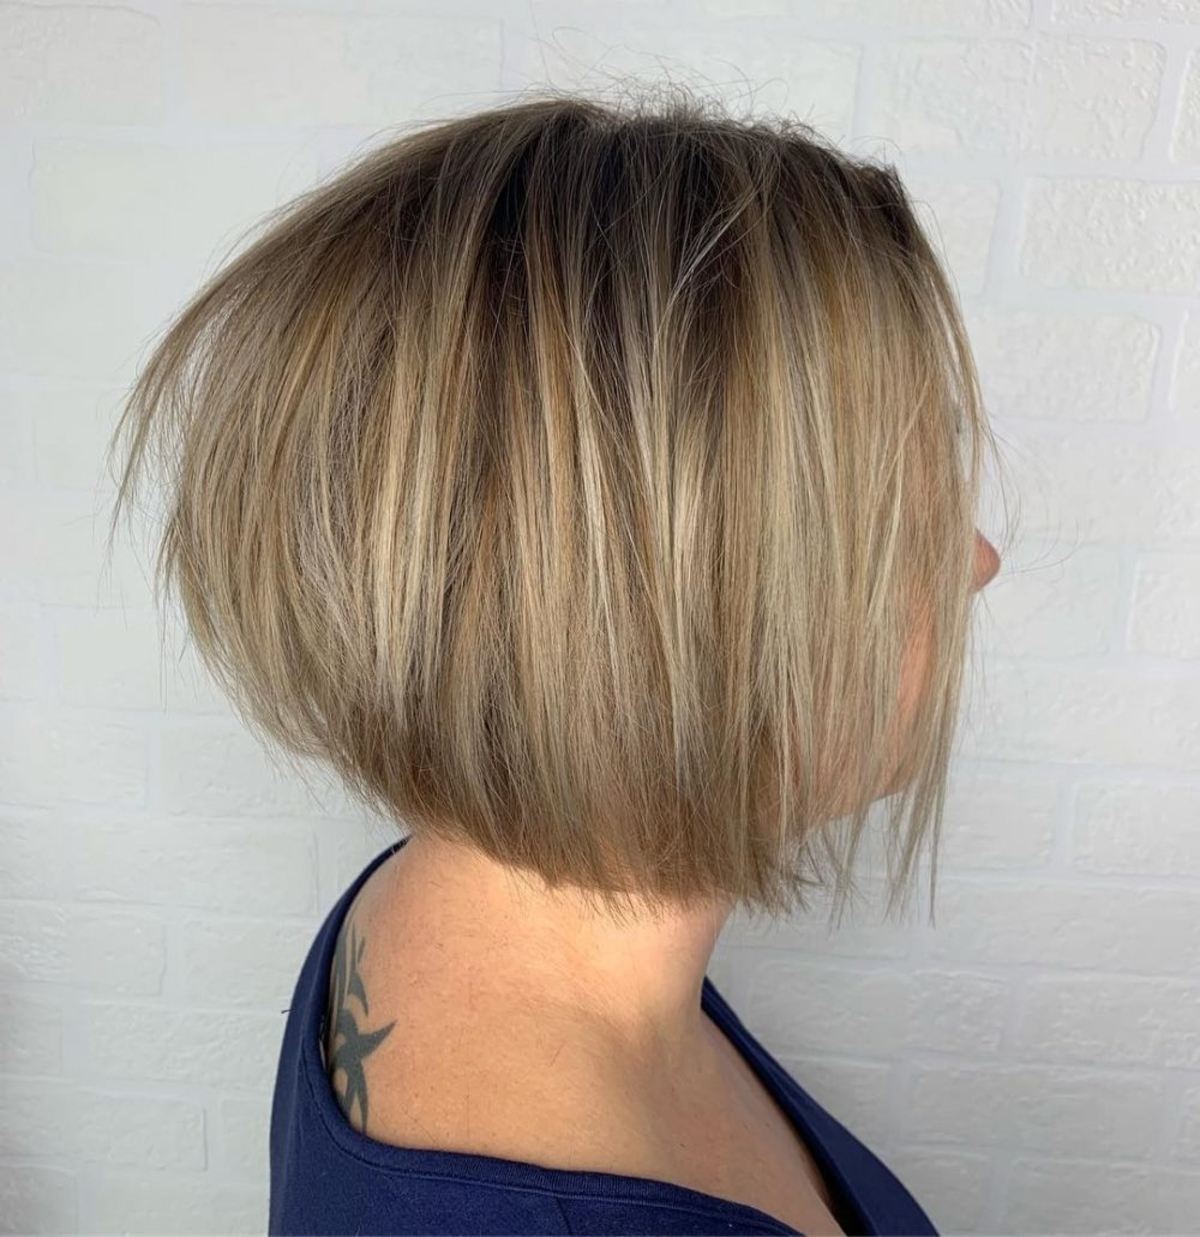 The Short Blonde Stacked Bob